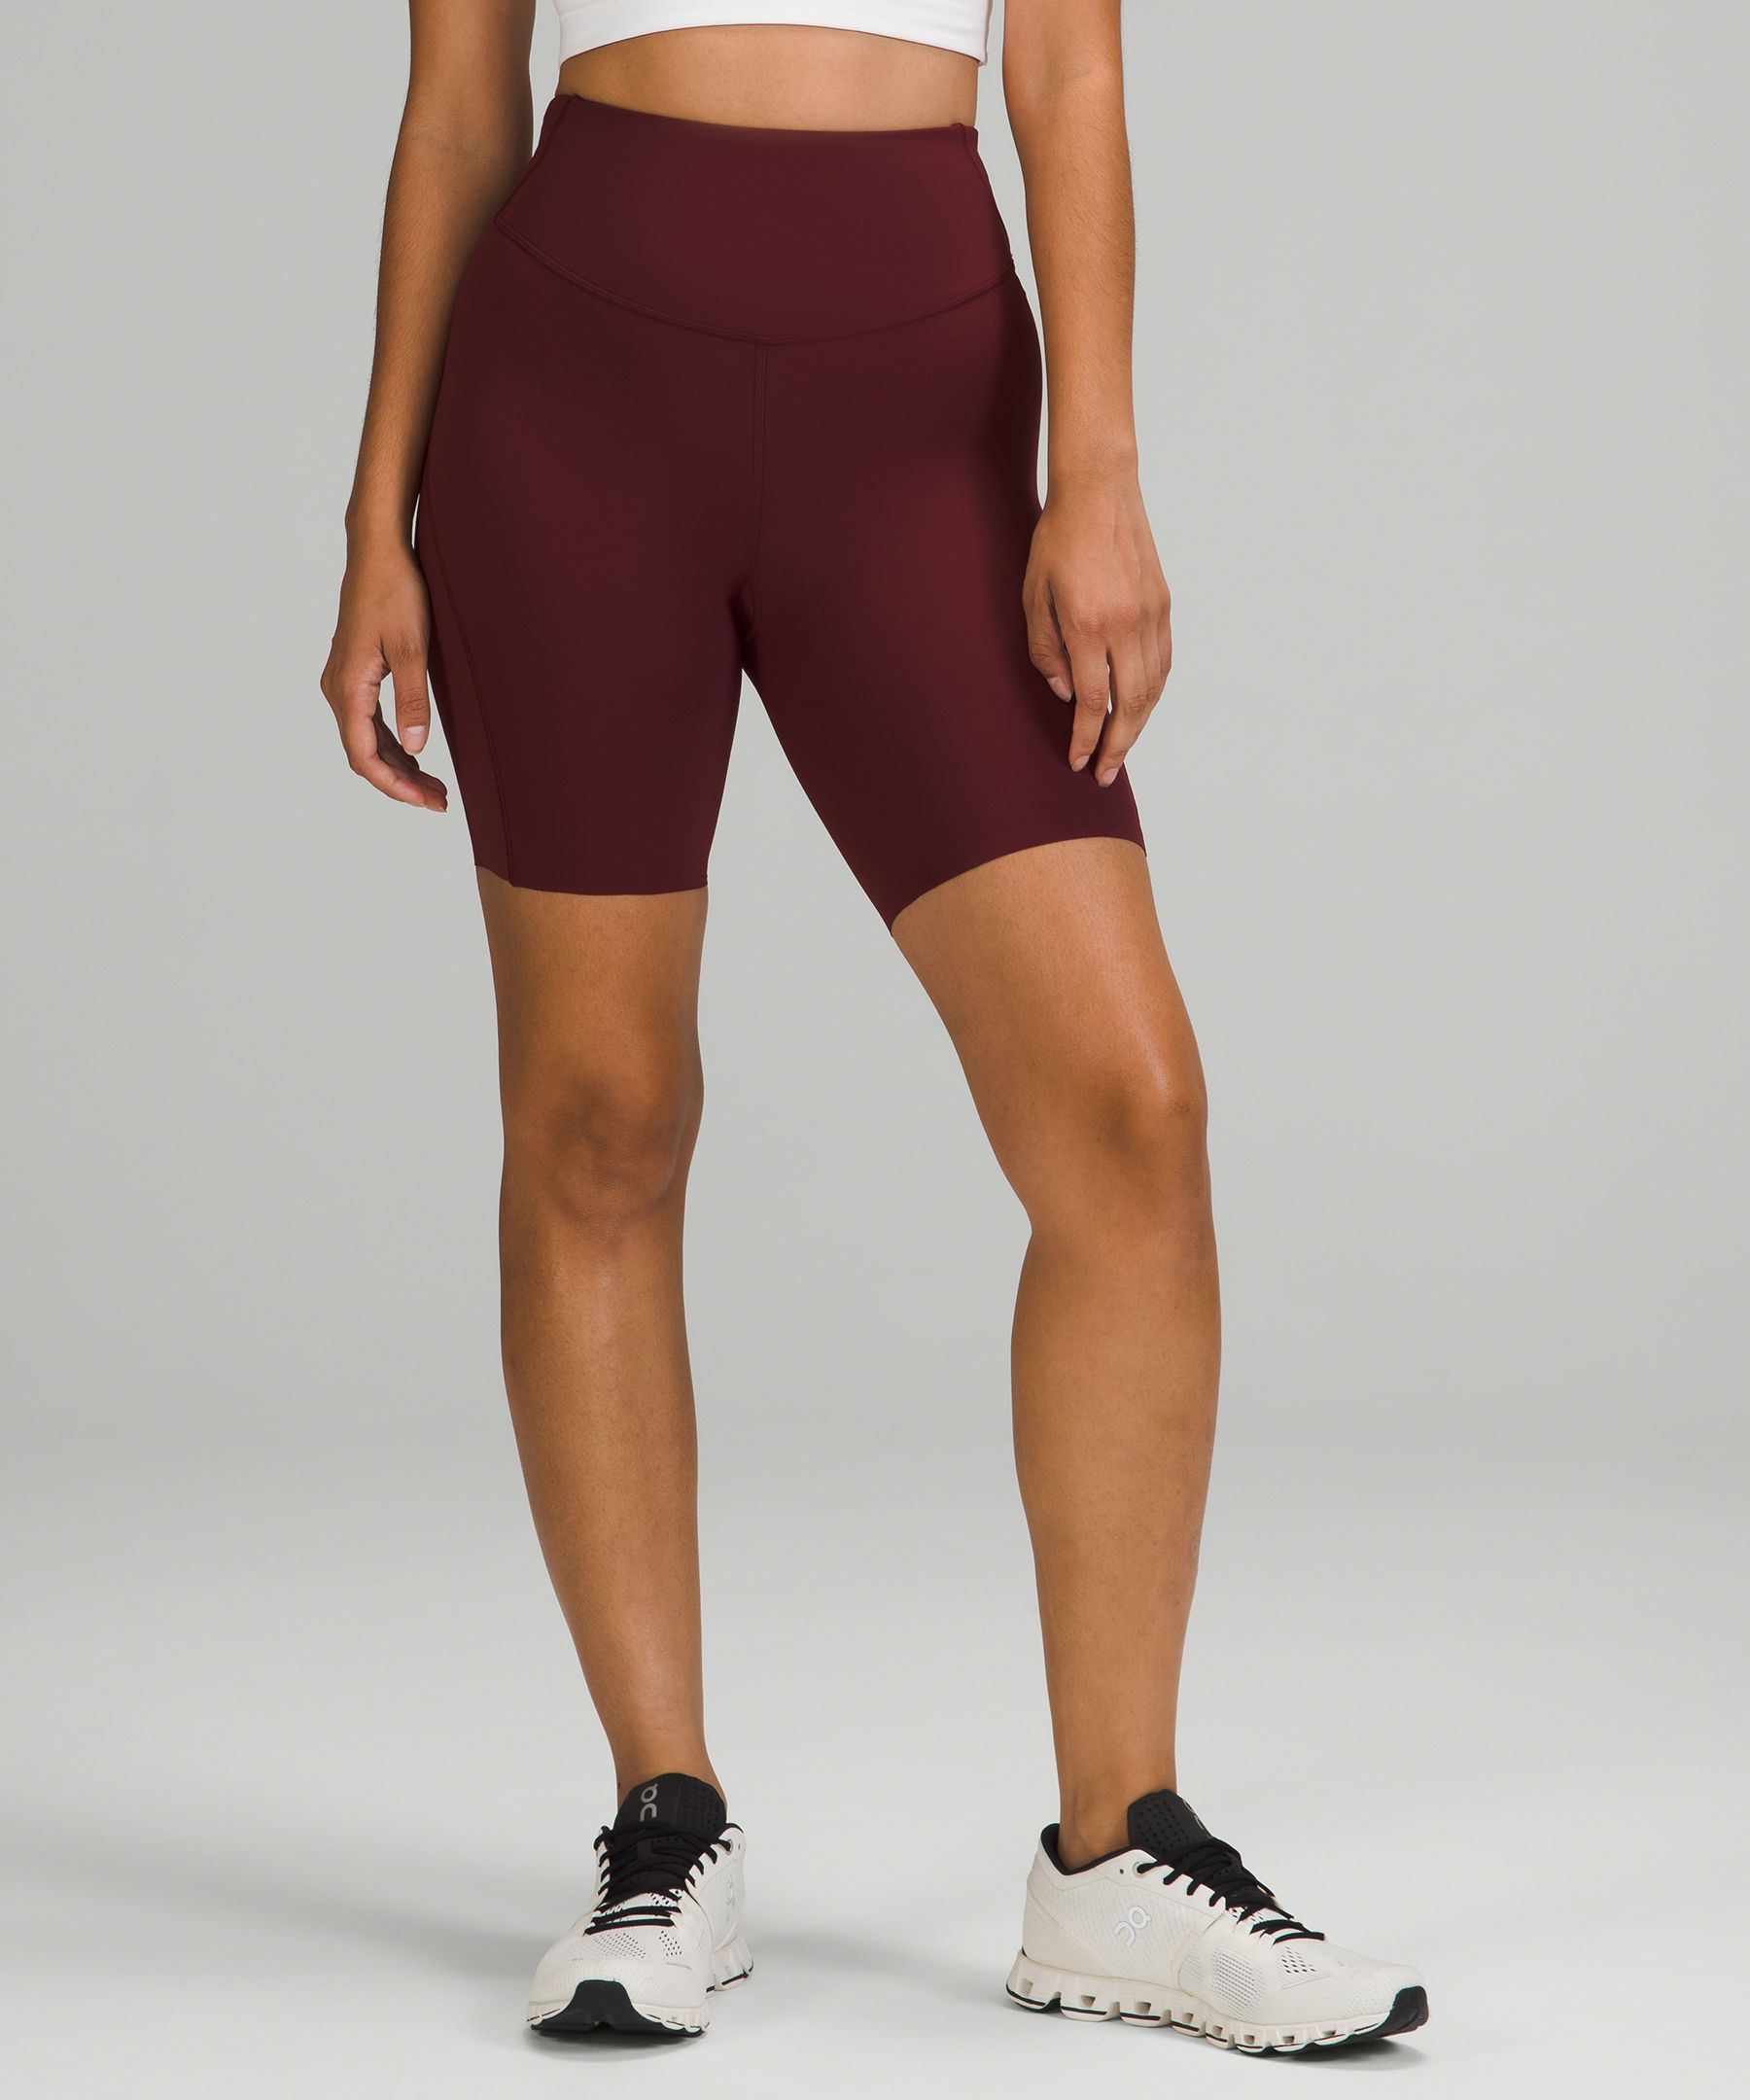 Lululemon Base Pace High-rise Shorts 8 In Red Merlot